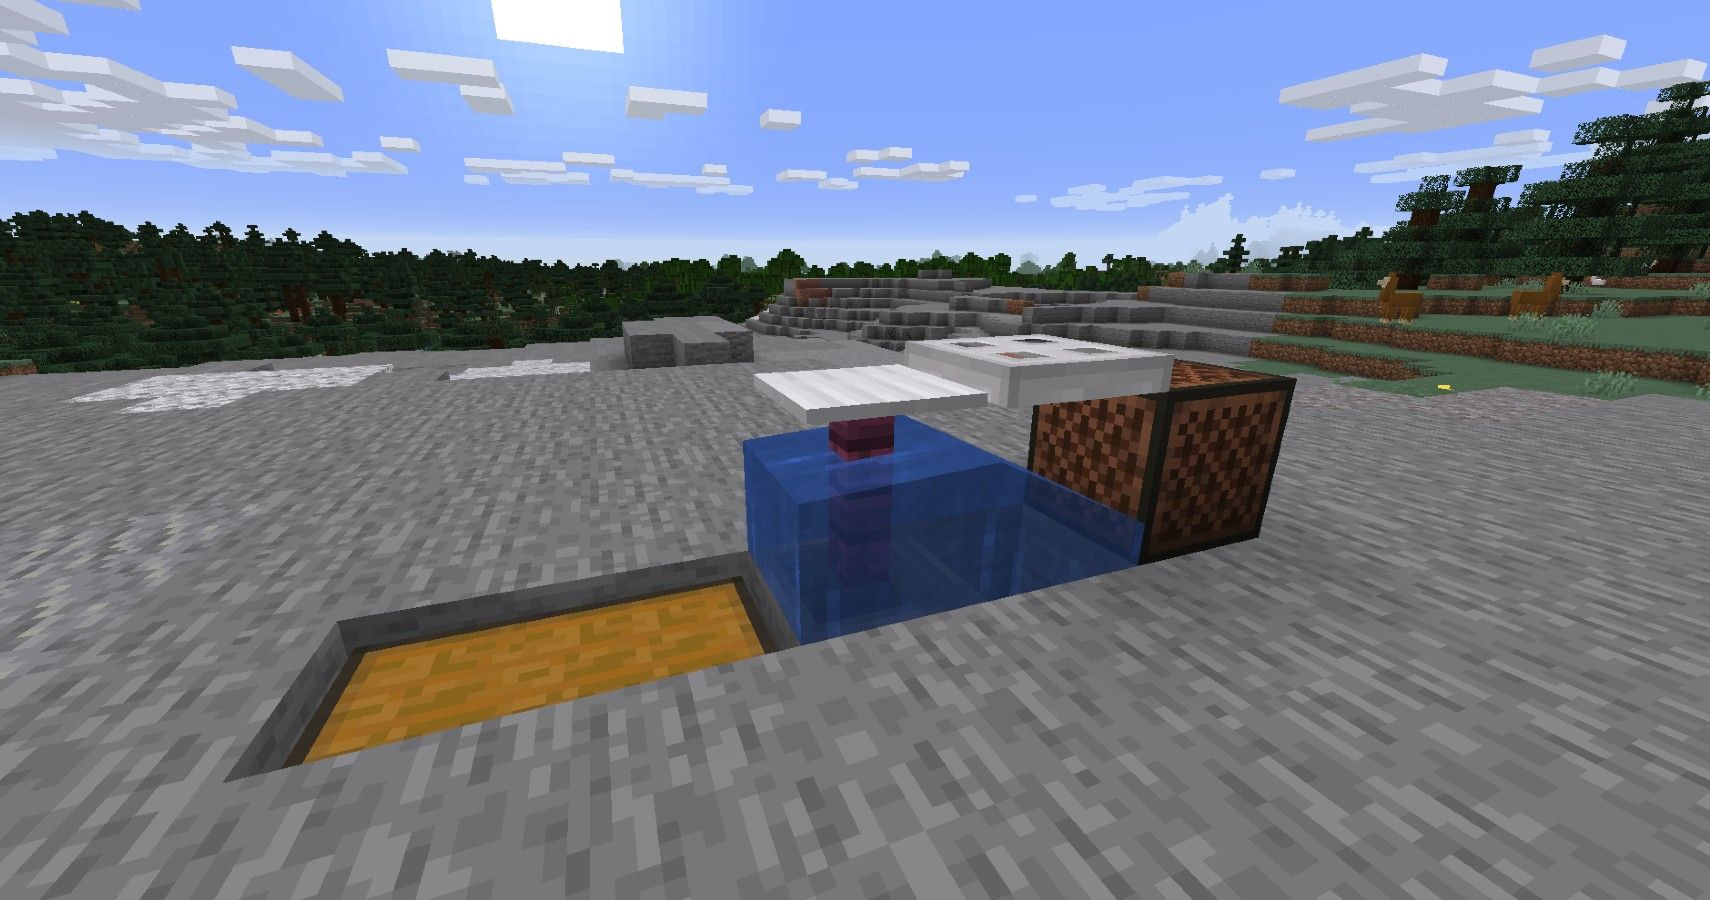 Complete version of a simple AFK fishing farm in minecraft